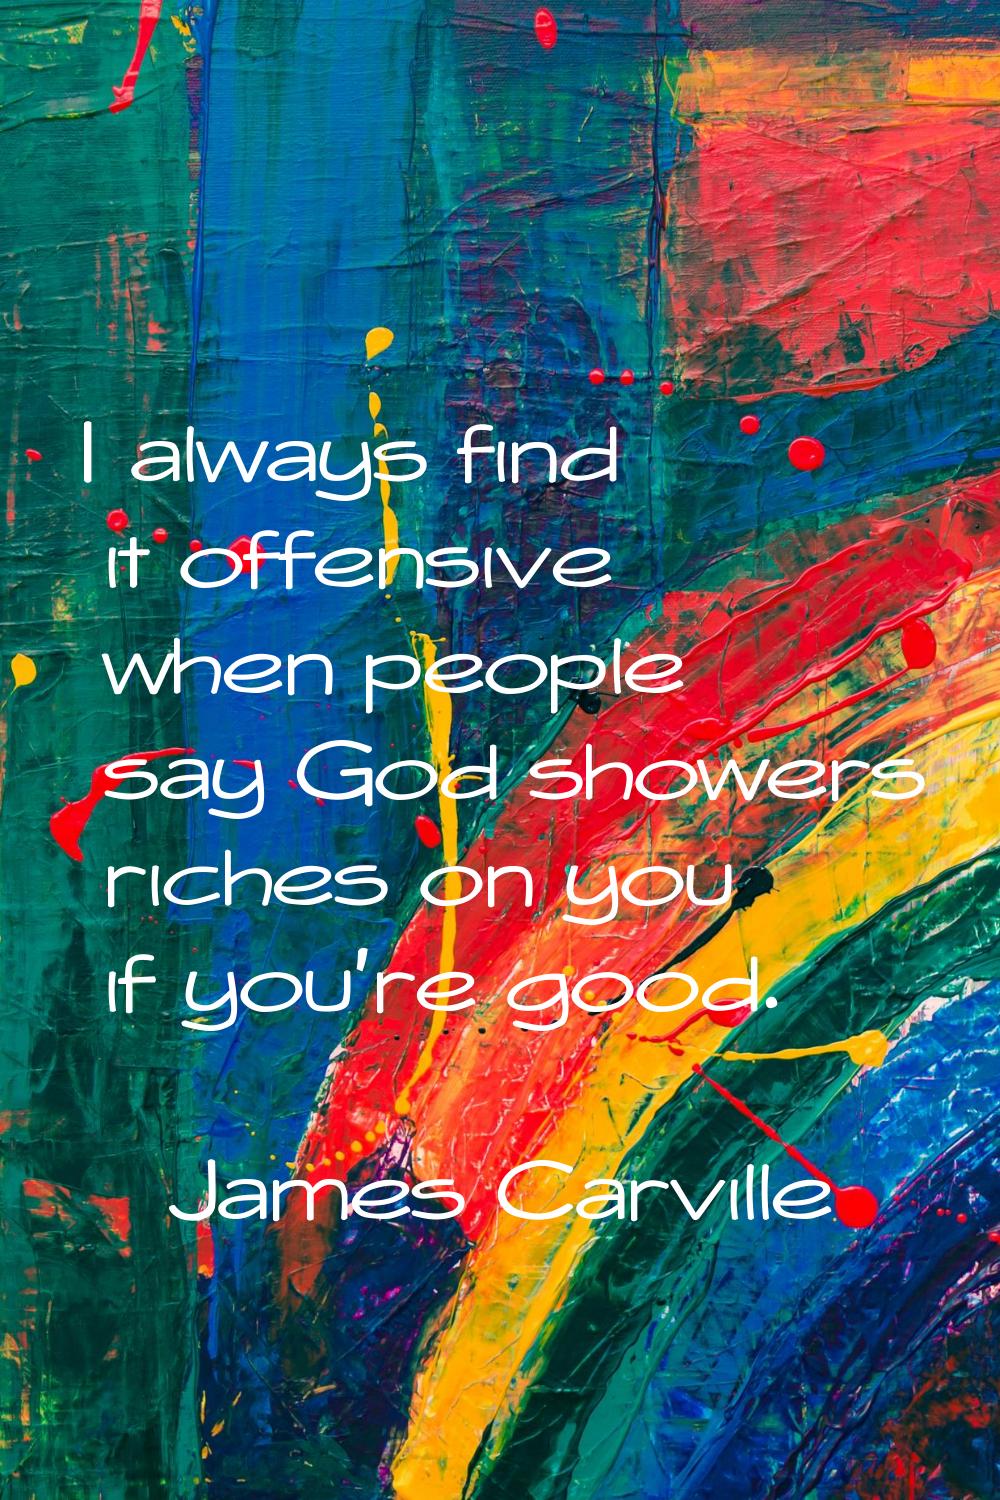 I always find it offensive when people say God showers riches on you if you're good.